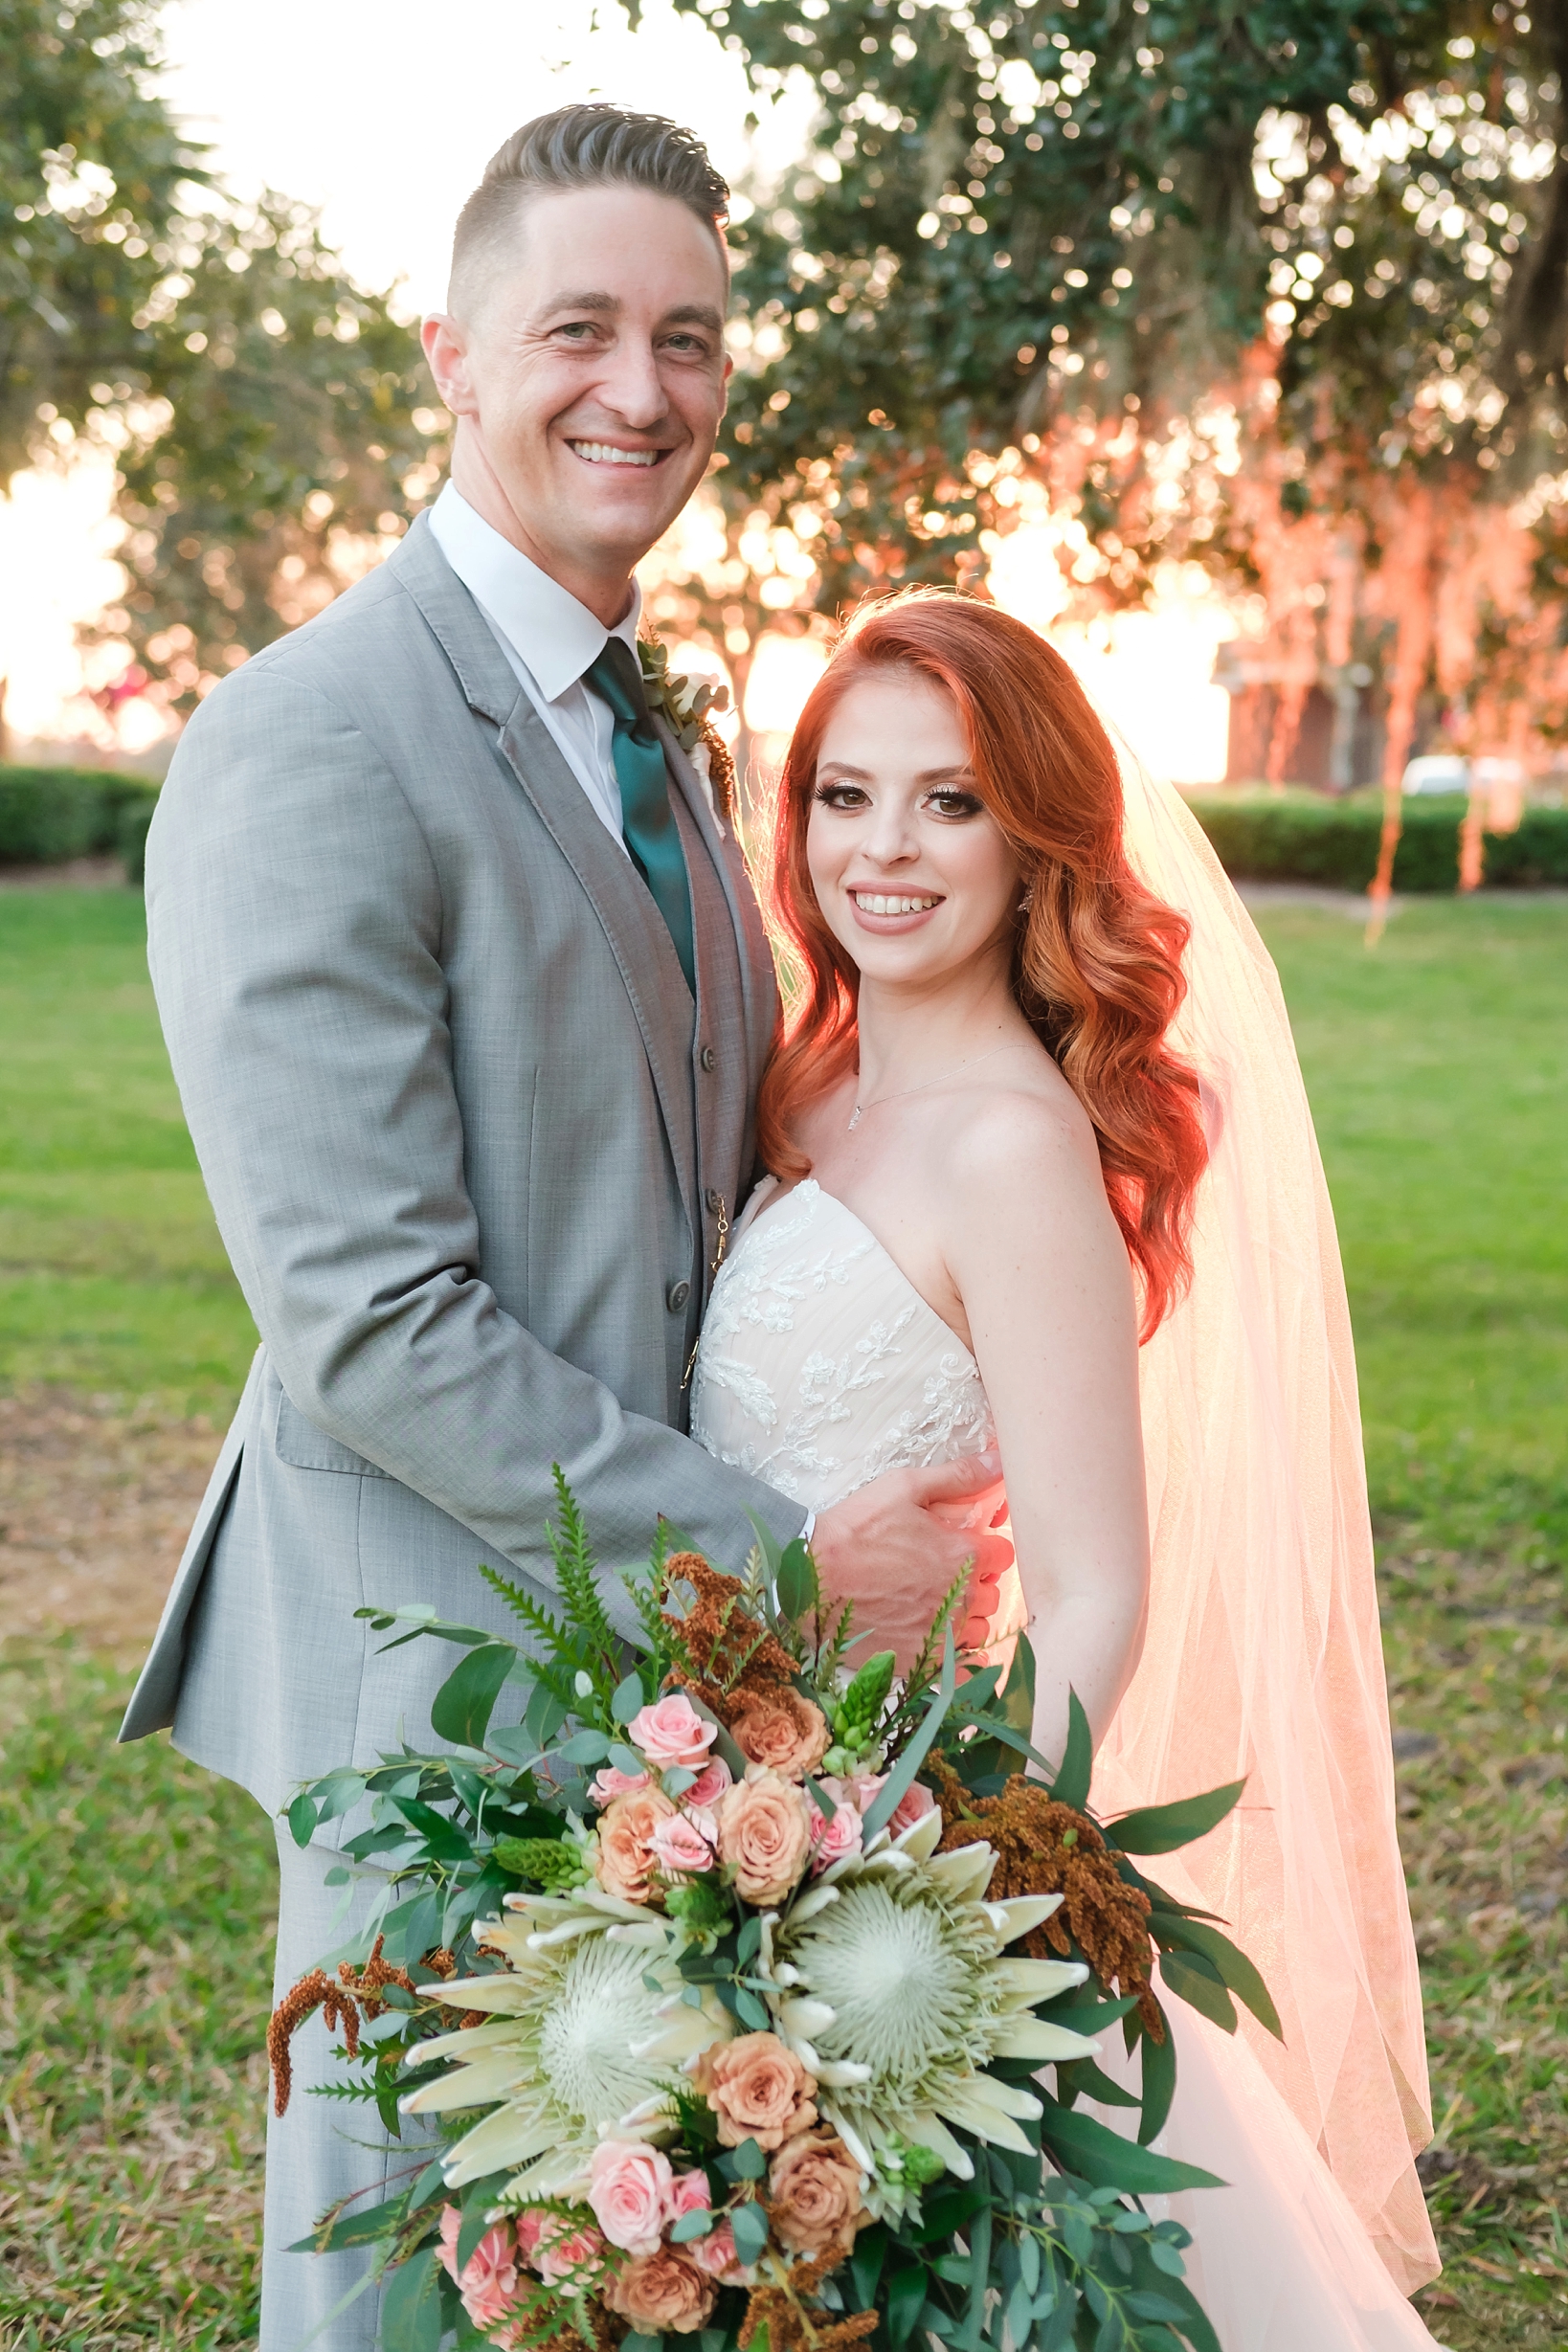 Bridal portrait of the married couple with the golden hour sunlight filling the background